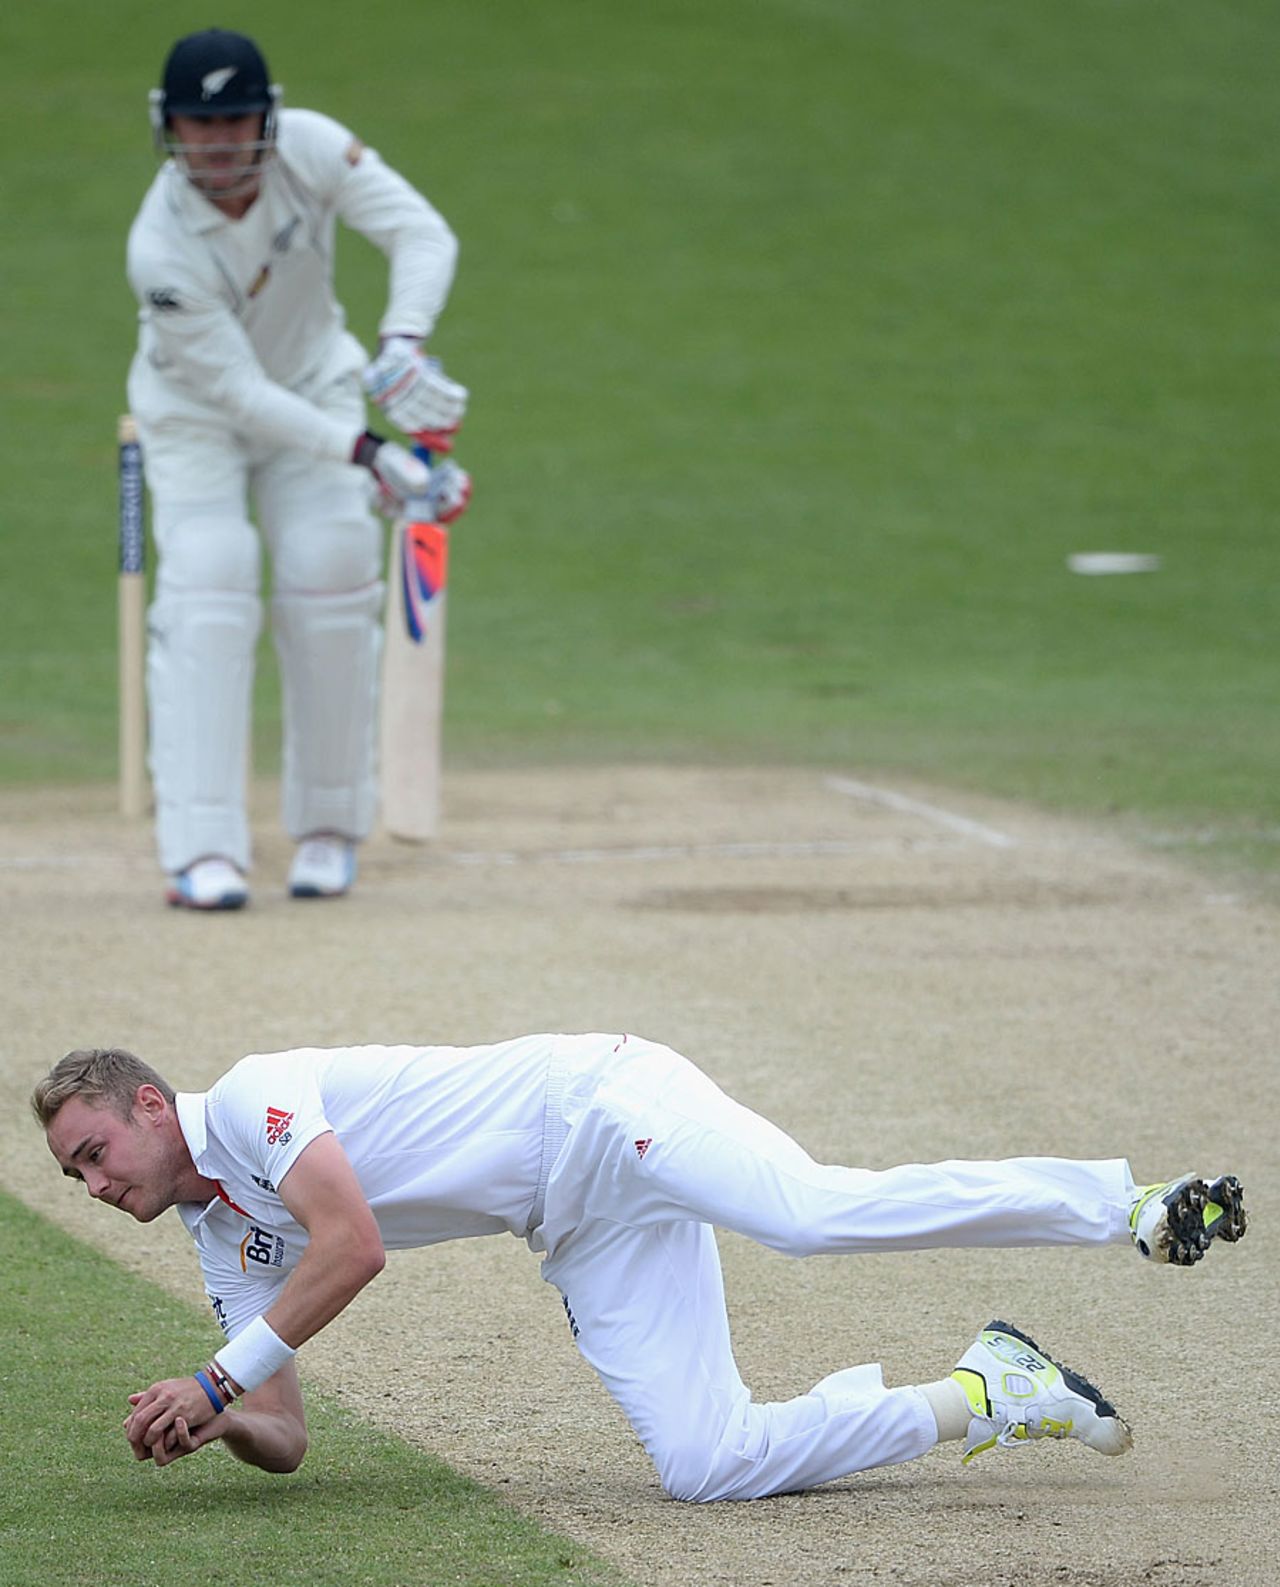 Stuart Broad takes a sharp return catch to dismiss Brendon McCullum, England v New Zealand, 2nd Investec Test, Headingley, 5th day, May 28, 2013